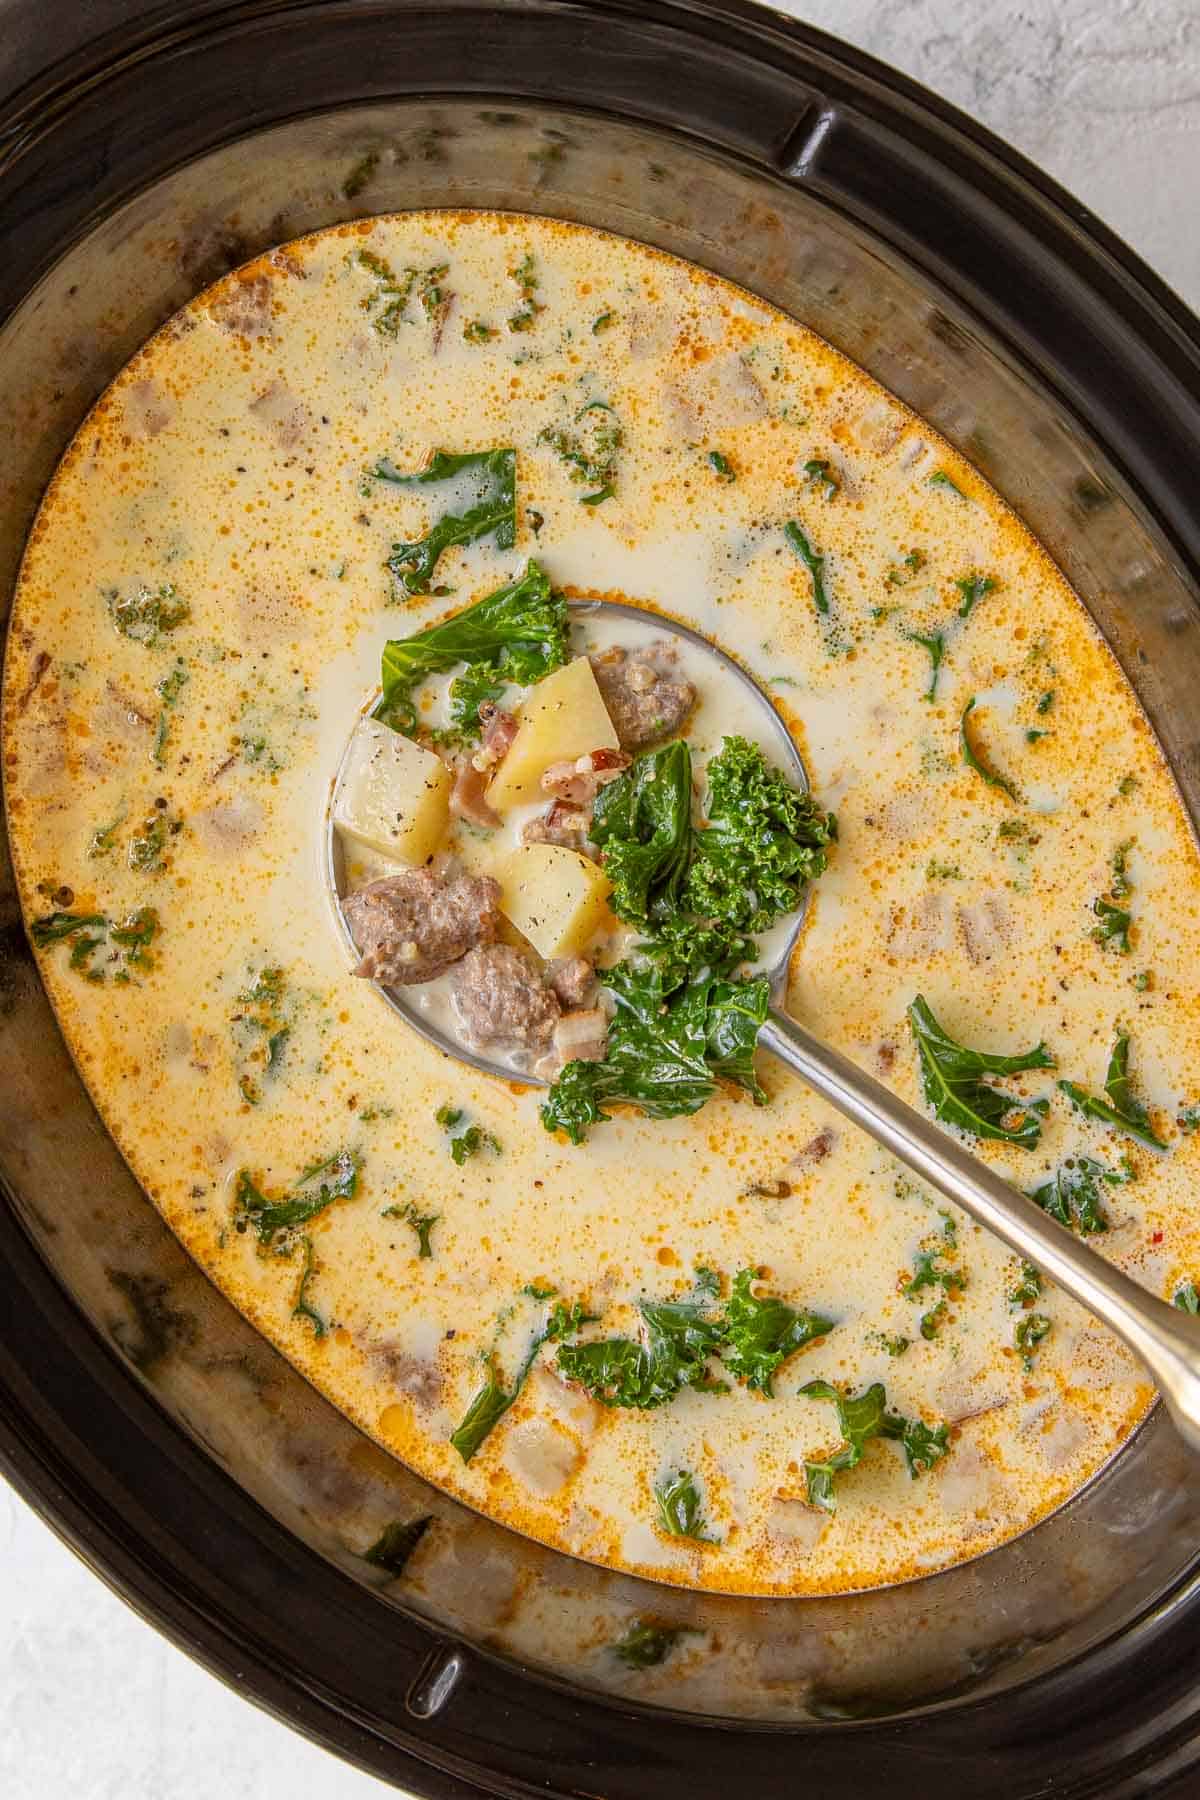 Overhead view of a ladle in Zuppa Toscana soup in an oval crockpot.